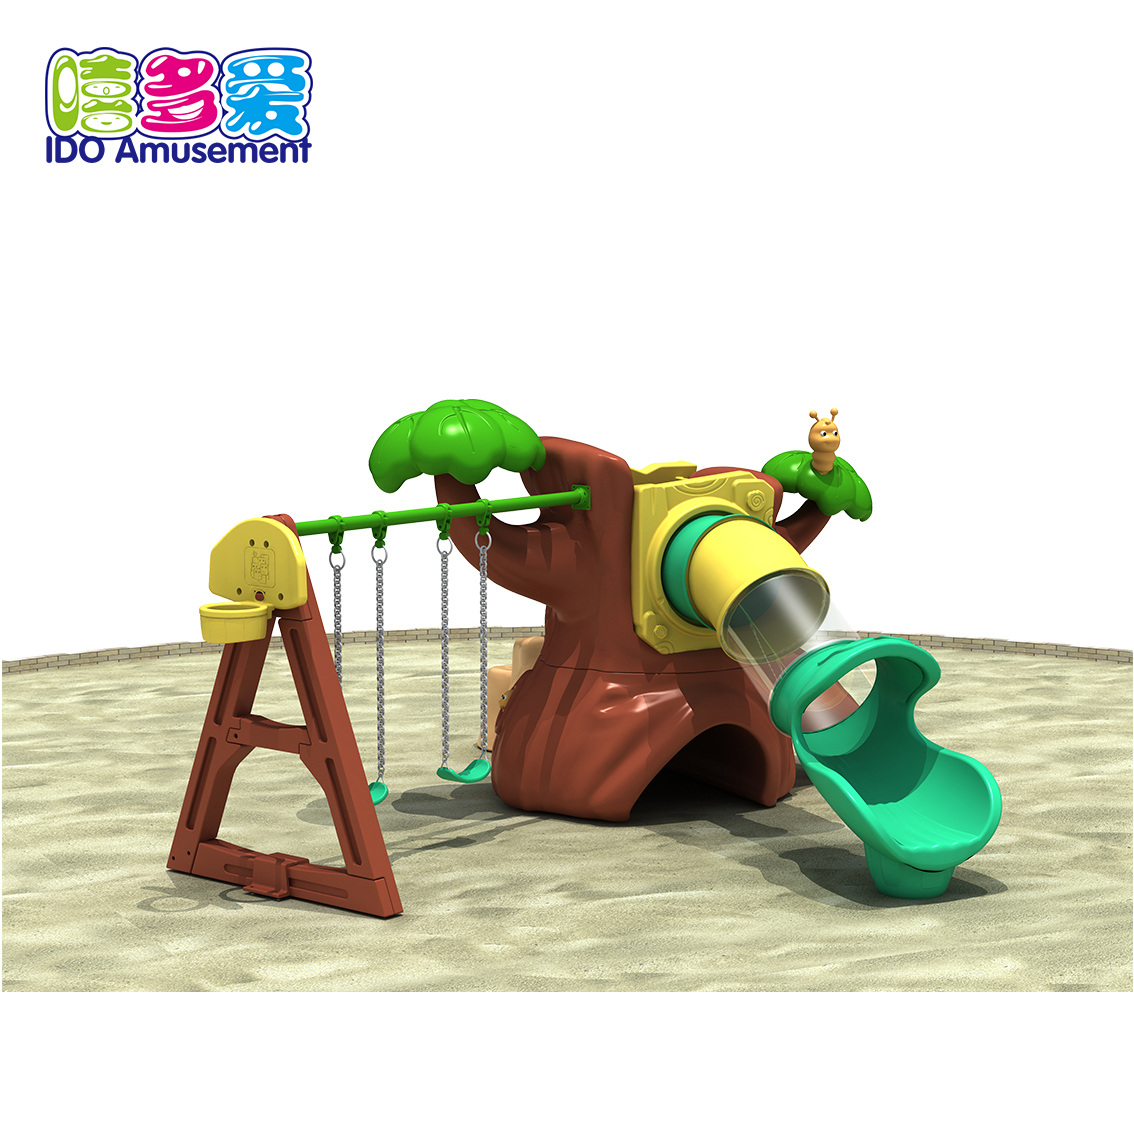 High Quality Wooden Playground Equipment Outdoor – Kids Plastic Swing And Slide – IDO Amusement